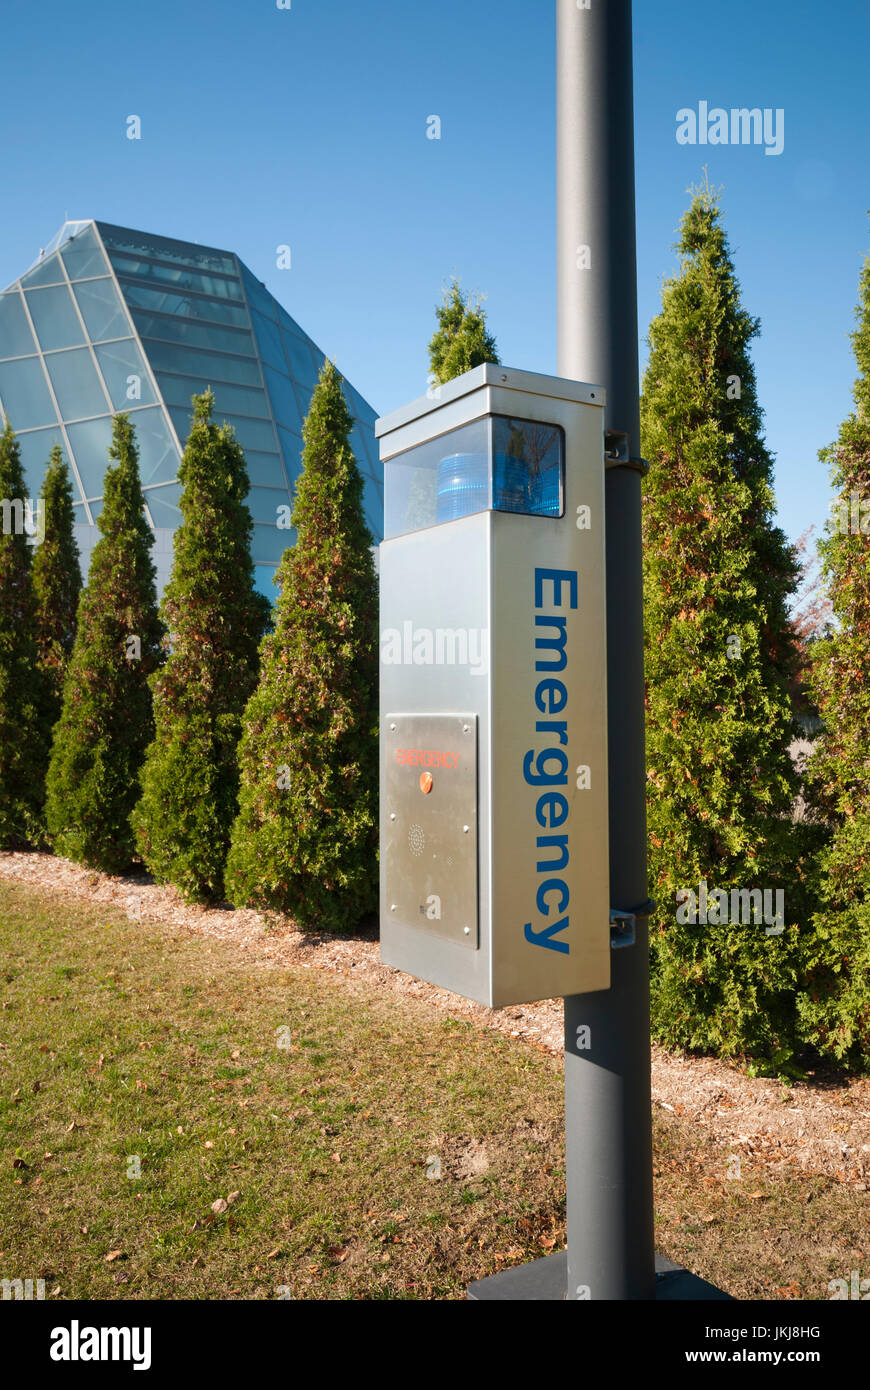 Emergency call box in the garden grounds of the Ismaili centre and Aga Khan museum in Toronto Ontario Canada Stock Photo